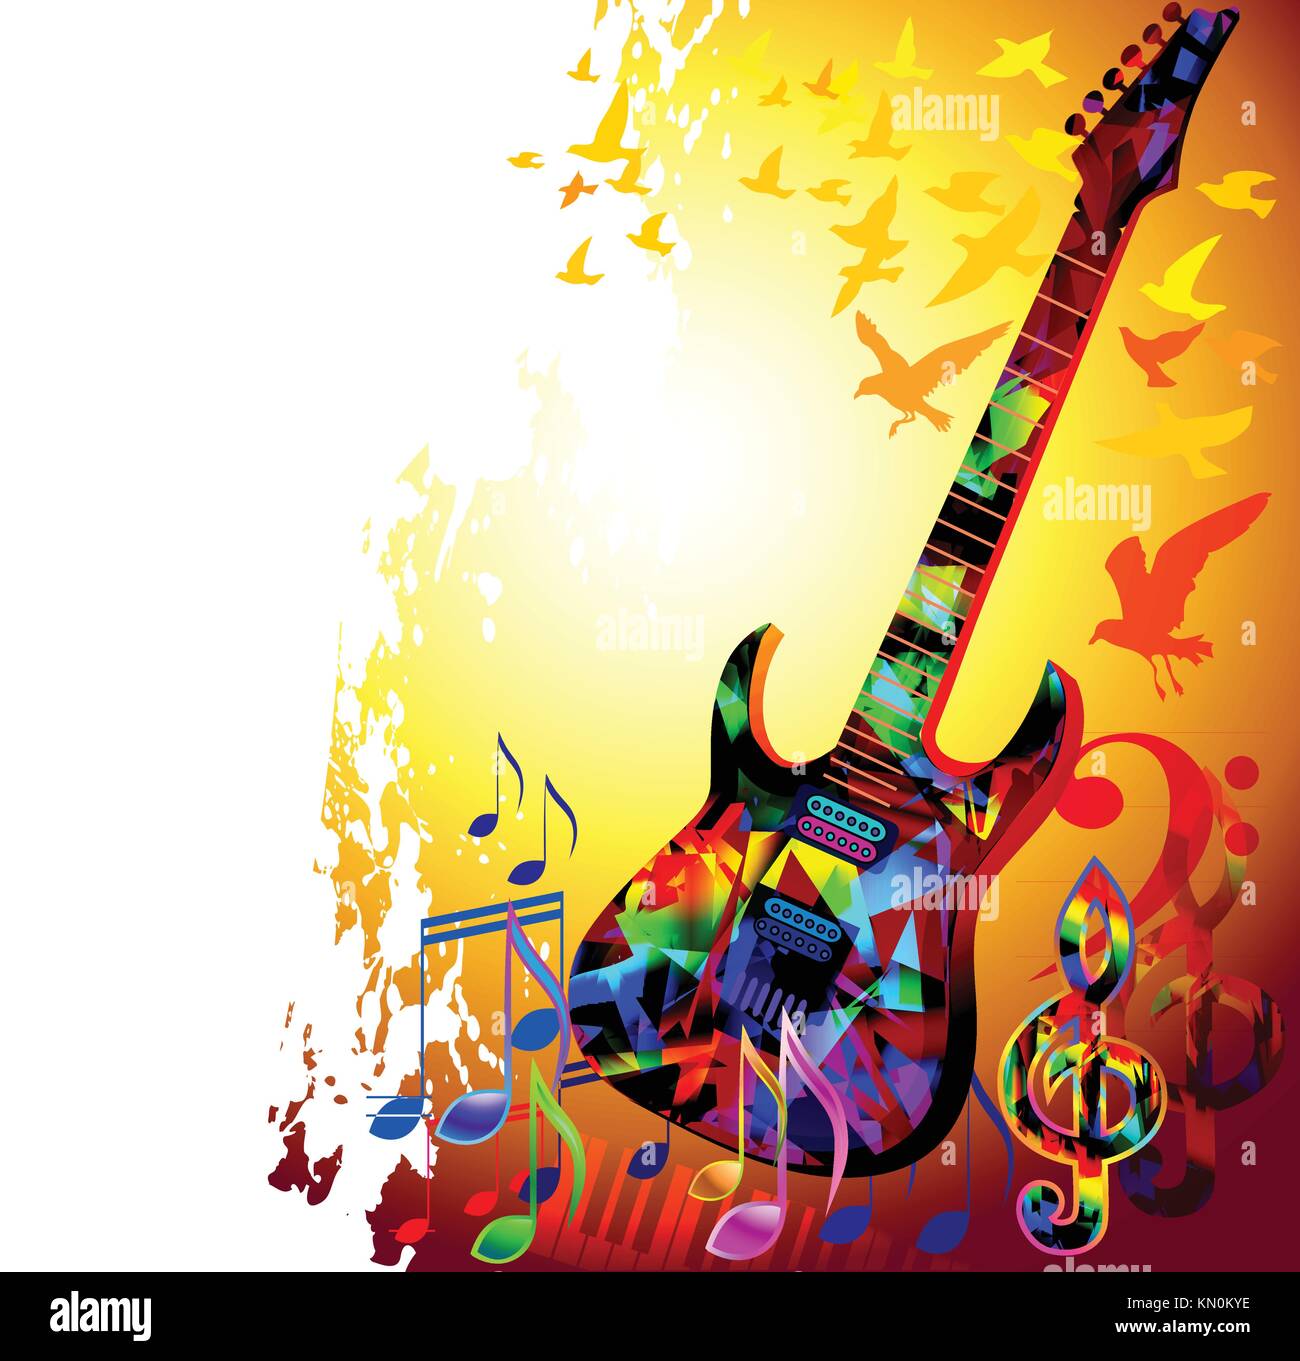 Colorful music background with electric guitar, music notes and Stock